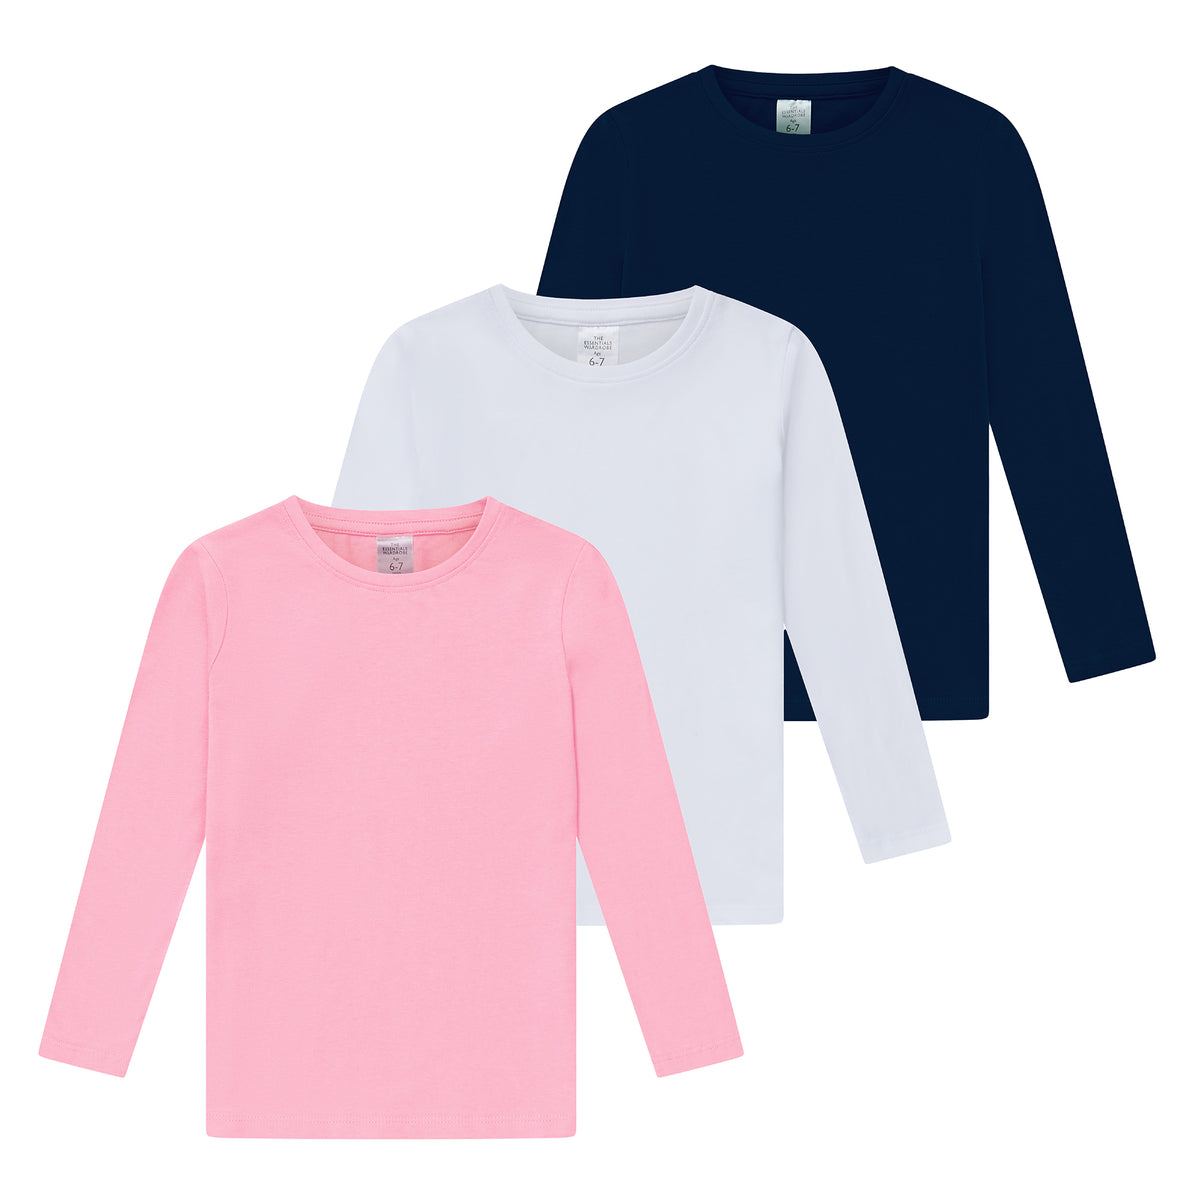 Girls 3 Pack LS T- Shirt Assorted 1 Younger